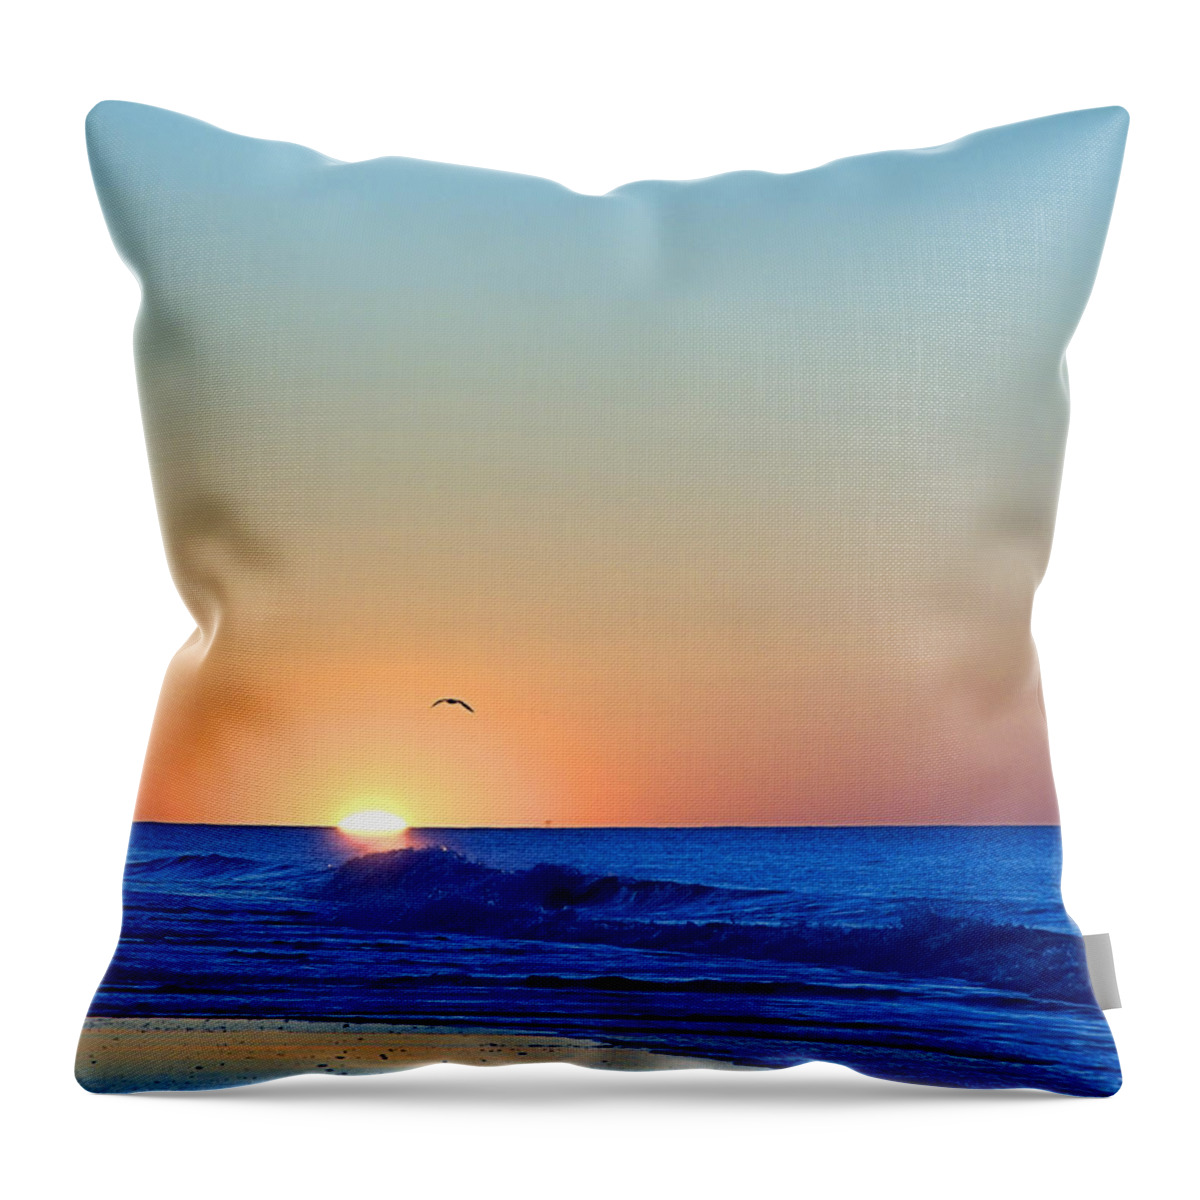 Seas Throw Pillow featuring the photograph Sunrise I V by Newwwman